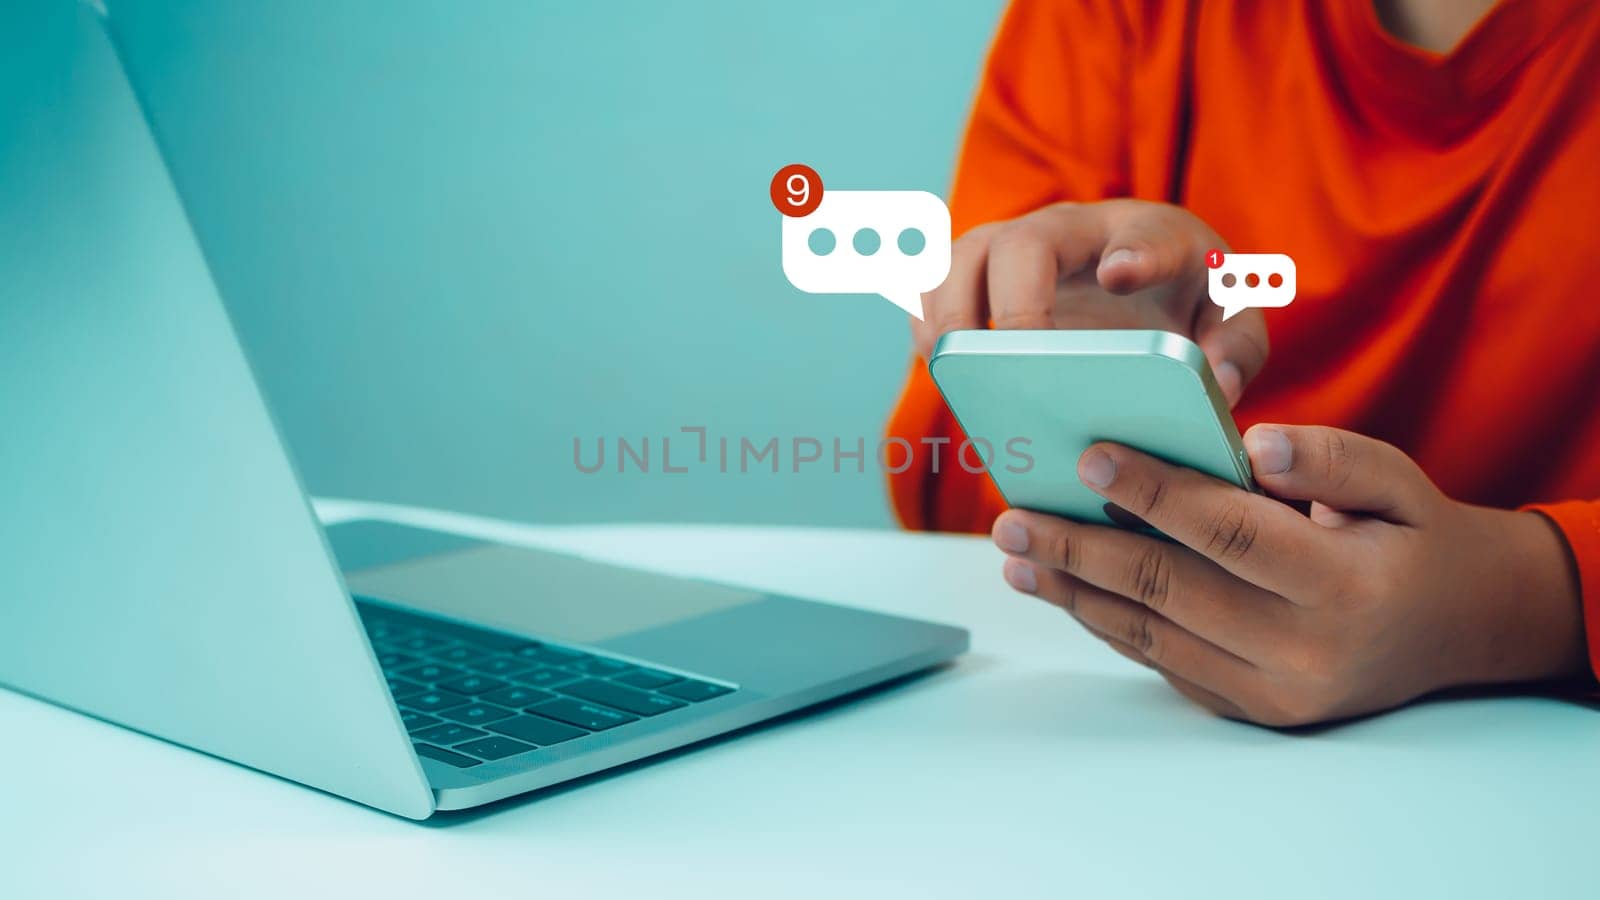 Human hand touching email on virtual screen. New email notification concept for business email communication and digital marketing. The inbox receives electronic message notifications. internet technology by Unimages2527